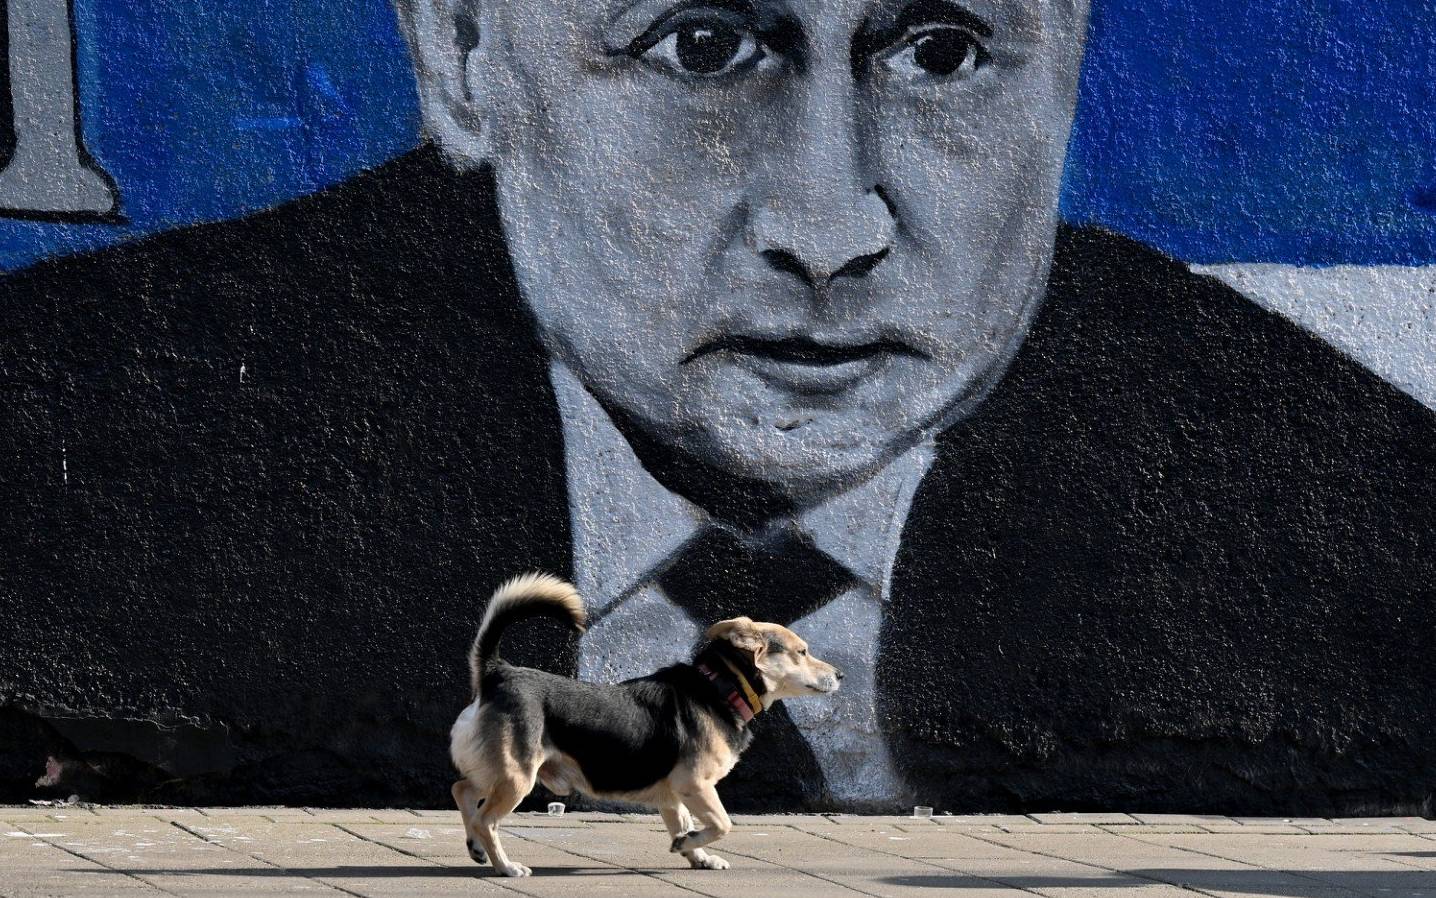 A dog walks past a mural depicting Russian President Vladimir Putin, with the Russian flag, in Belgrade on March 5, 2022. (Photo by Andrej ISAKOVIC / AFP)